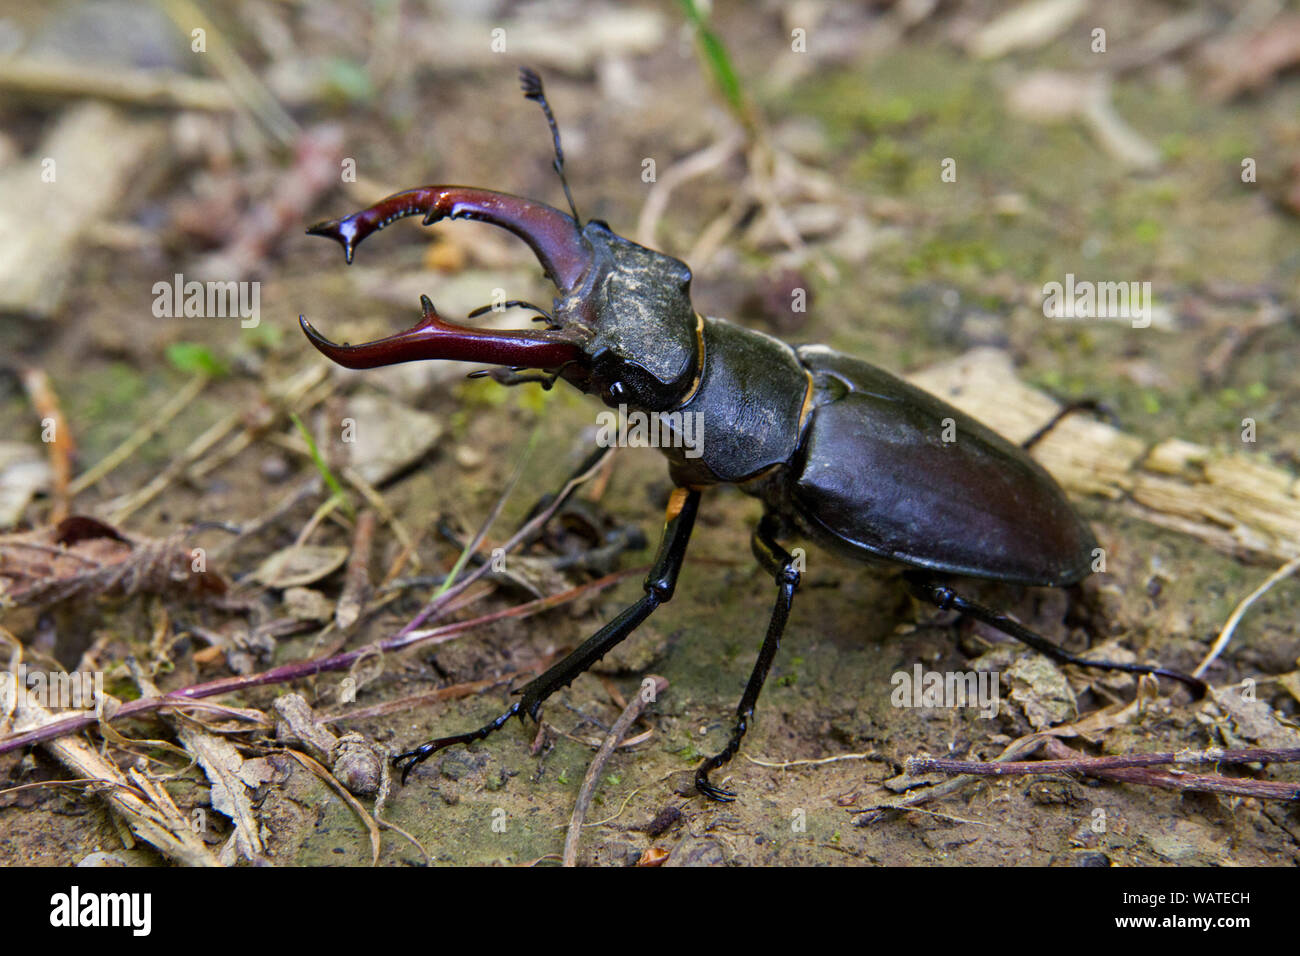 Male Stag beetle, Lucanus cervus, a beetle with enlarged mandibles, looking like the horns of a stag Stock Photo